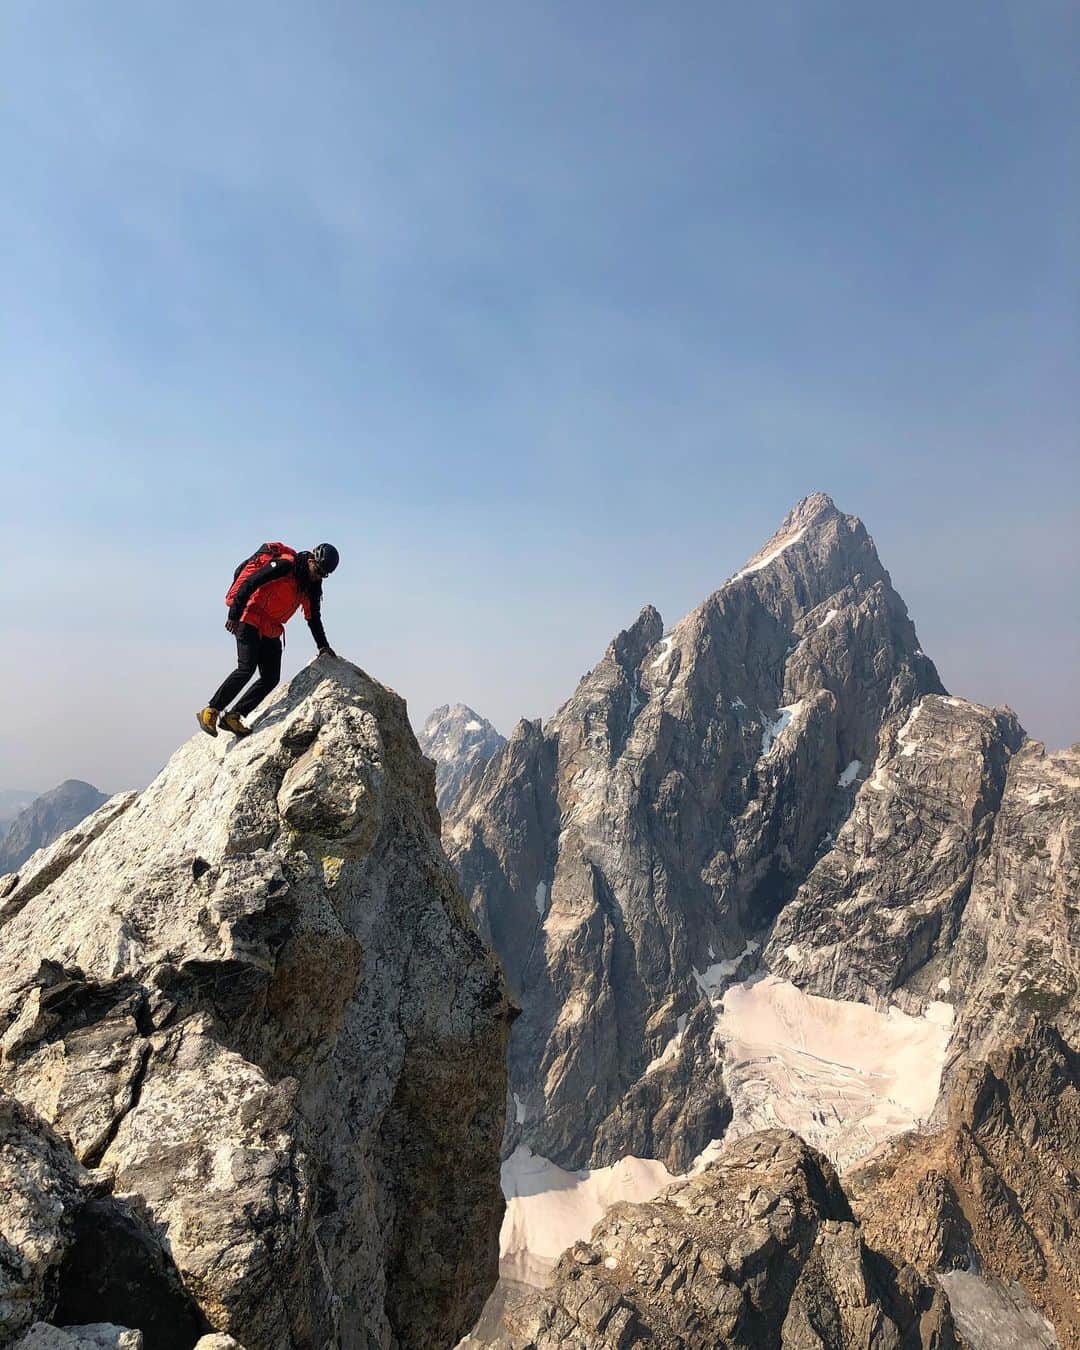 コンラッド・アンカーさんのインスタグラム写真 - (コンラッド・アンカーInstagram)「The Grand Teton Range of Wyoming offers technical climbing in a demanding environment. The steep gneiss can range from incredibly solid with climbable features to loose rock in a state of disintegration. Over the years thousands of climbers have perfected their craft in this multifaceted range.  Early September @sav.cummins @adreadedclimber & @jimmychin and I set out to do the Grand Traverse with bivouacs for the fun of camping out with friends. Jimmy and Sav, in working with the @nytmag, would see the climb through their lenses. Days spent moving over ground with a pack and nights spent keeping warm are quality regardless of where they take place. A little adversity brings us closer.   Manoah on the summit of Teewinot, group picture - smiles all around,  Savs snaps of Manoah leading and soloing, a small hole in the rock with the setting sun, Sav remembrance, descending from the Upper Saddle as the hammer graces the anvil, Jimmy joking about my glasses after the windy bivy, sunset, Jimmy’s night photo.   In March of this year @nolan_smythe was killed in a climbing accident. Sav has been on a path reconciliation with climbing and gravity after her loved one was lost. Spreading a thimble full of his ashes was a step in this process. Perhaps one is a “lifer” when you work through grief by climbing.  We miss you Nolan.  With gratitude to the wonderful people @nytimes for your interest in climbing.  Thanks, as ever @danduane for your writing.   @grandtetonnps is within Crow, Gros Ventre, Blackfeet, Nez Perce, Bannock & Shoshone Traditional Lands. Thank you Park service for being good stewards of public lands.」9月28日 9時40分 - conrad_anker